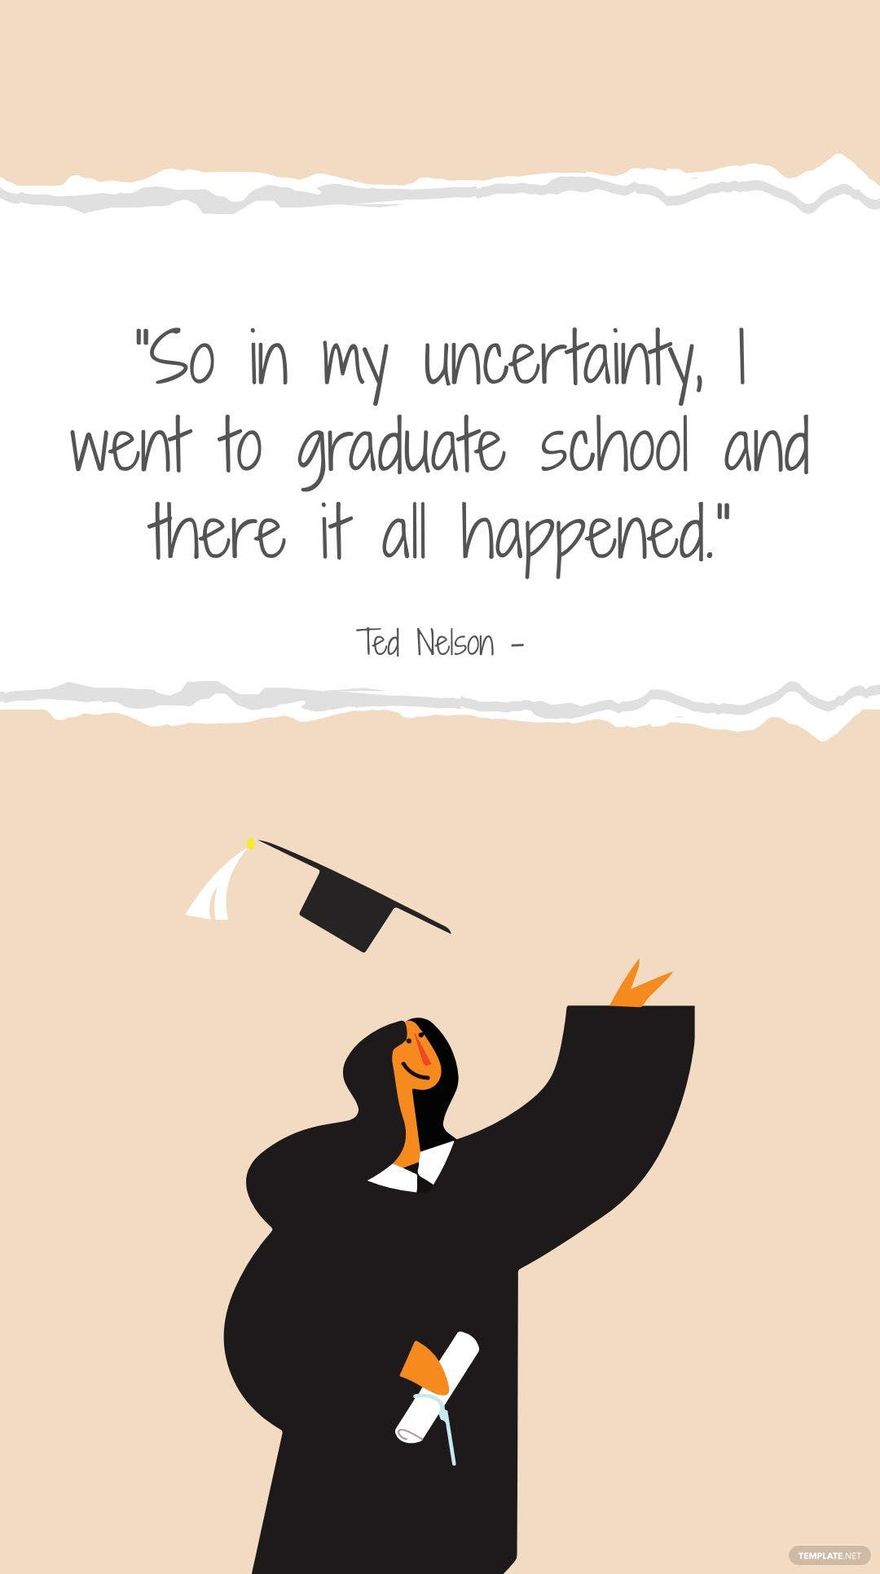 Free Ted Nelson - So in my uncertainty, I went to graduate school and there it all happened. in JPG